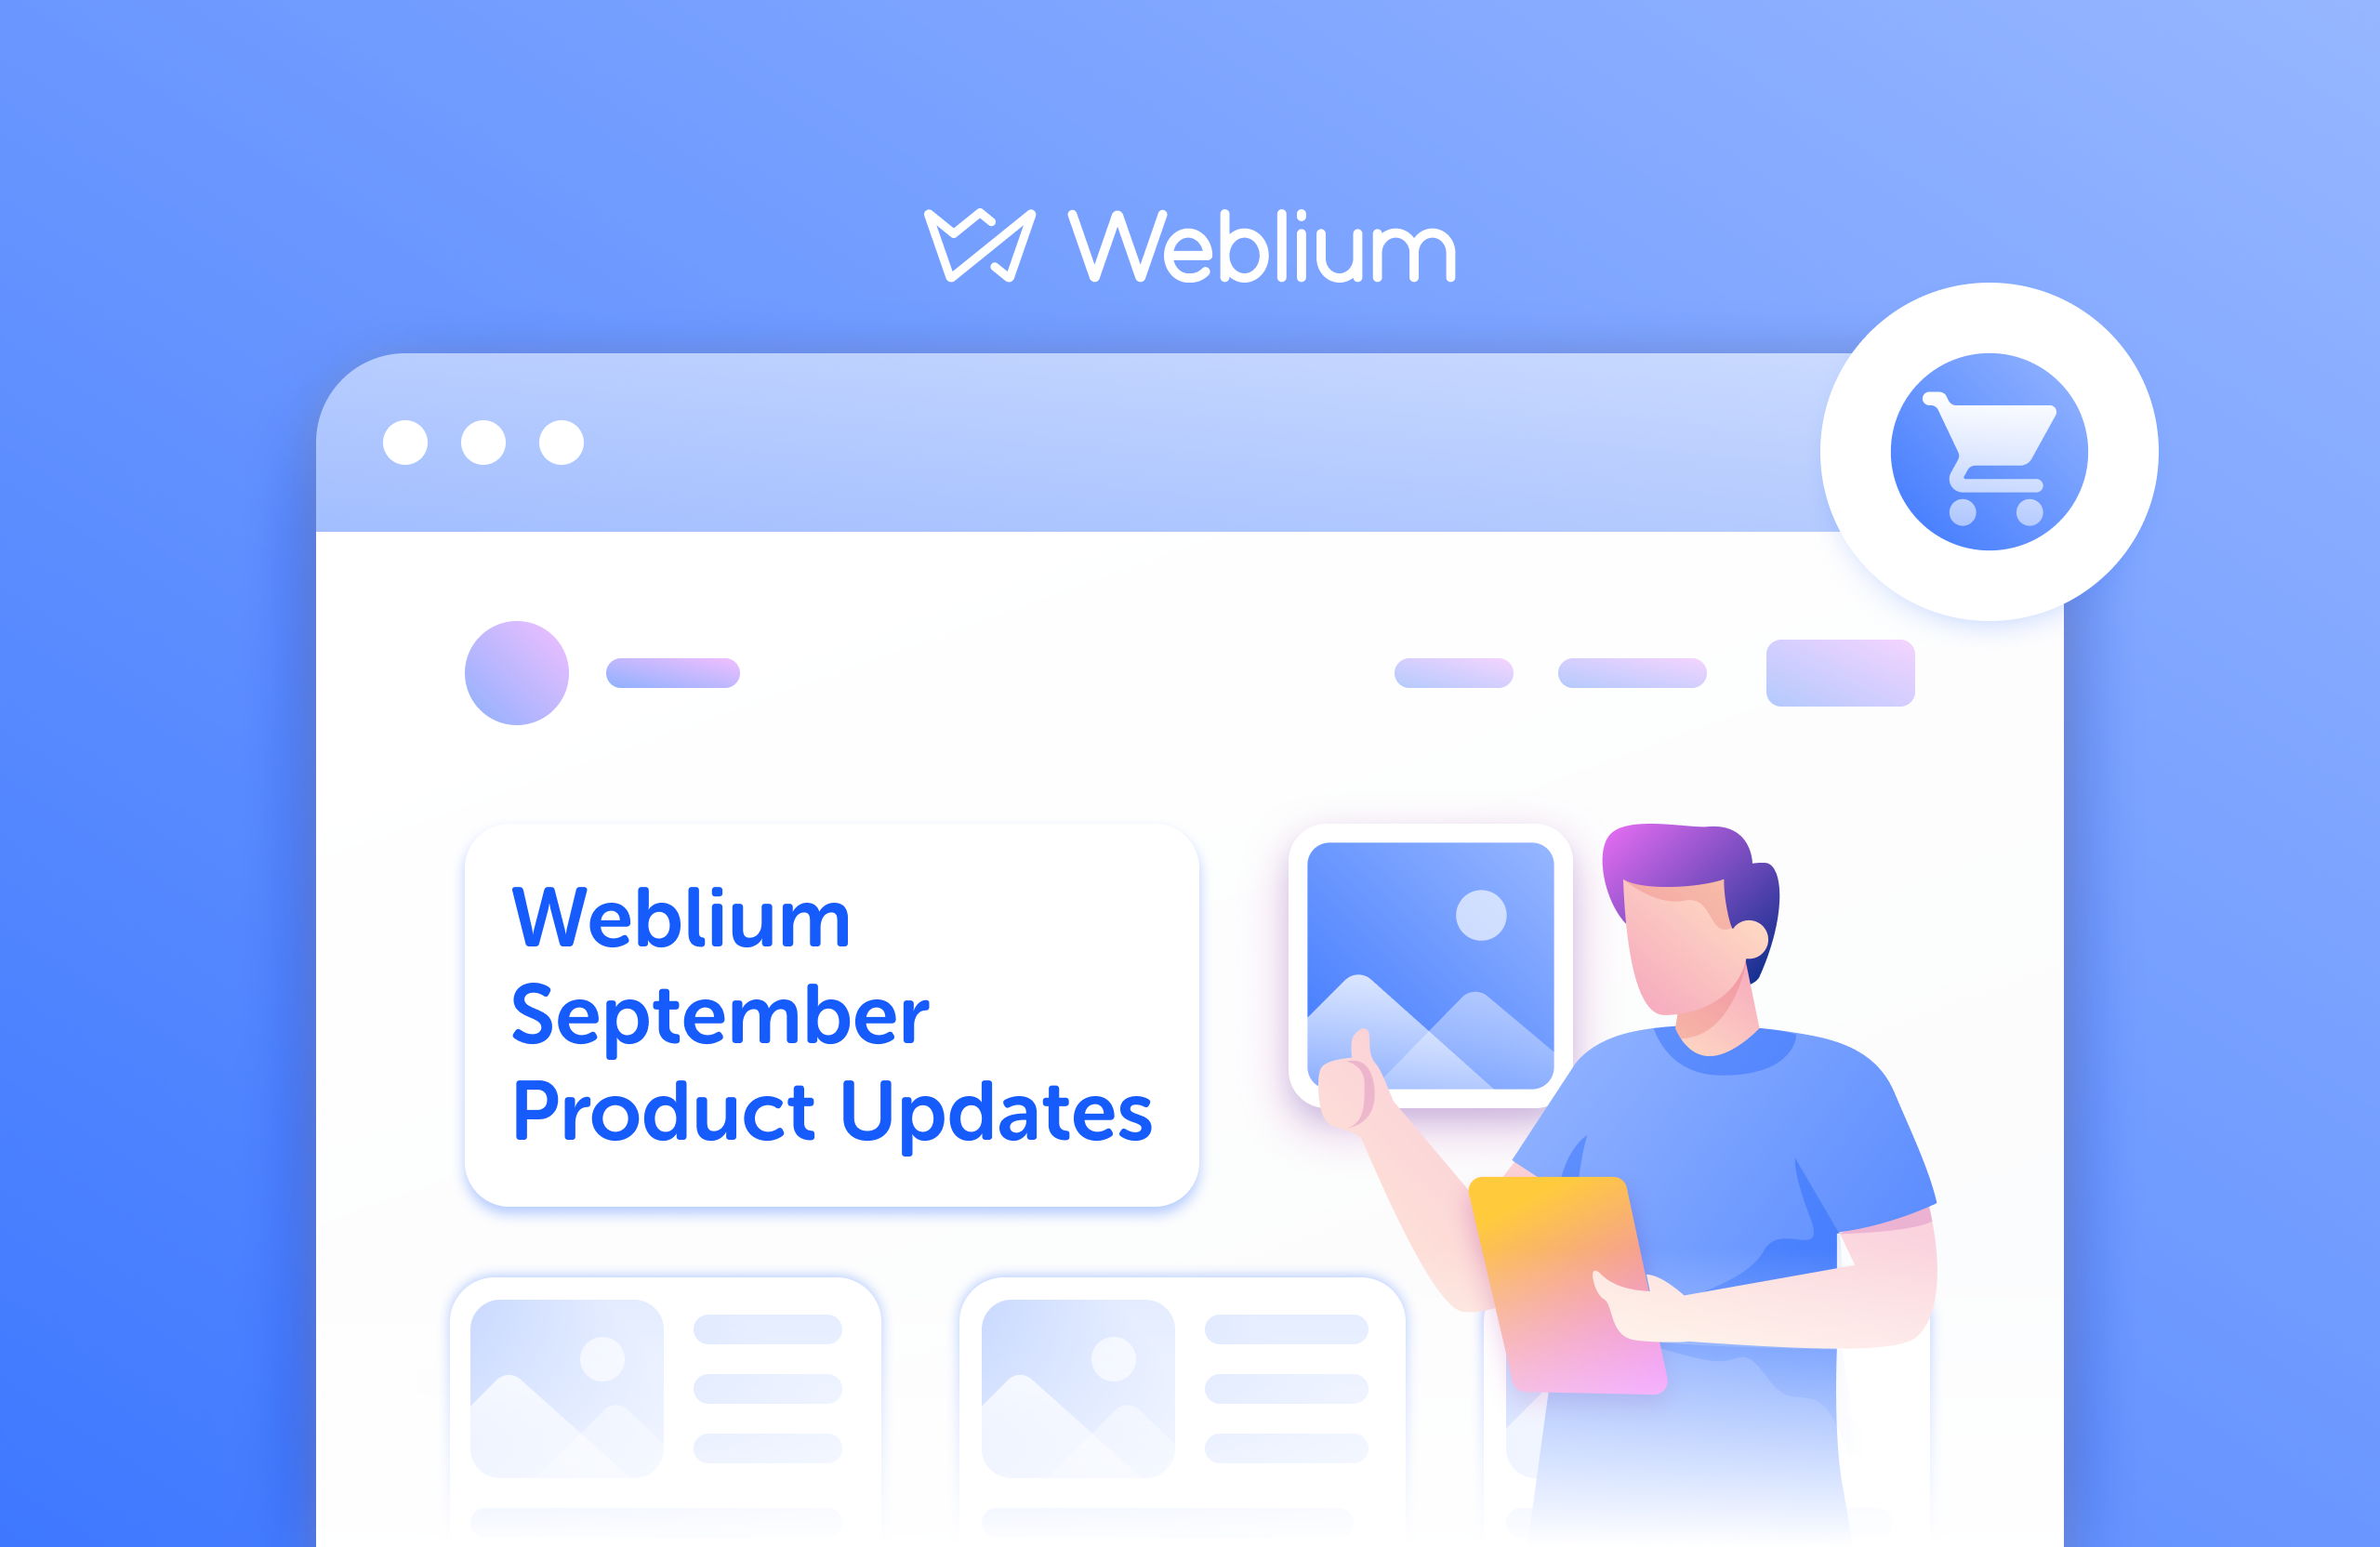 September Product Updates